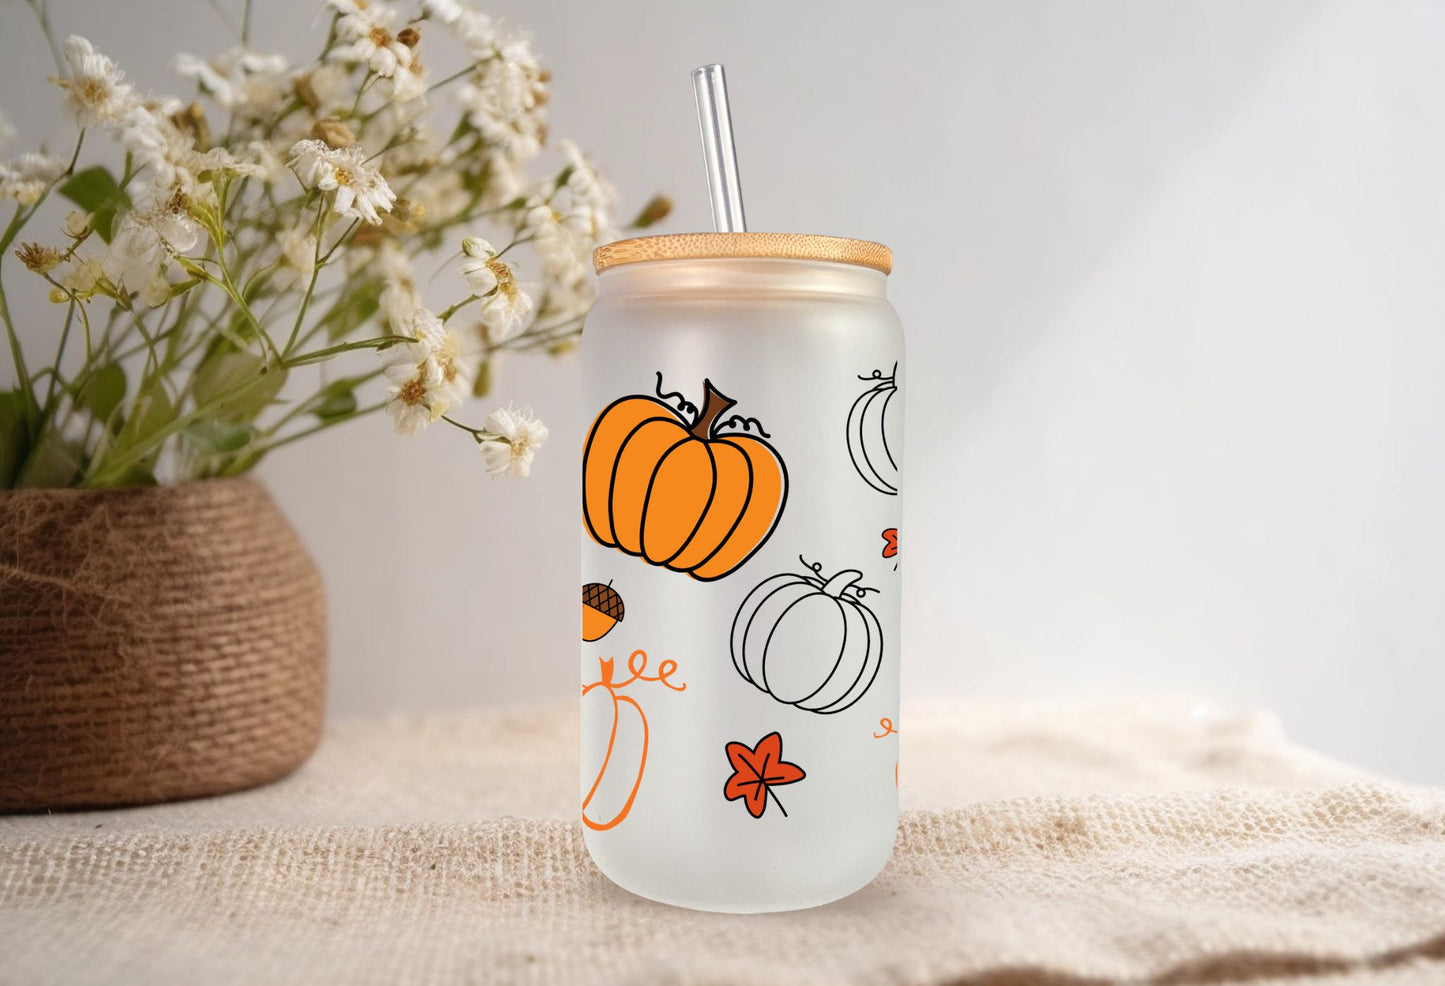 Enjoy your Favorite Pumpkin Spice Drink in Our "Pumpkin" design 16 oz frosted beer can Glass l Libbey Style l Bamboo Lid and Straw included